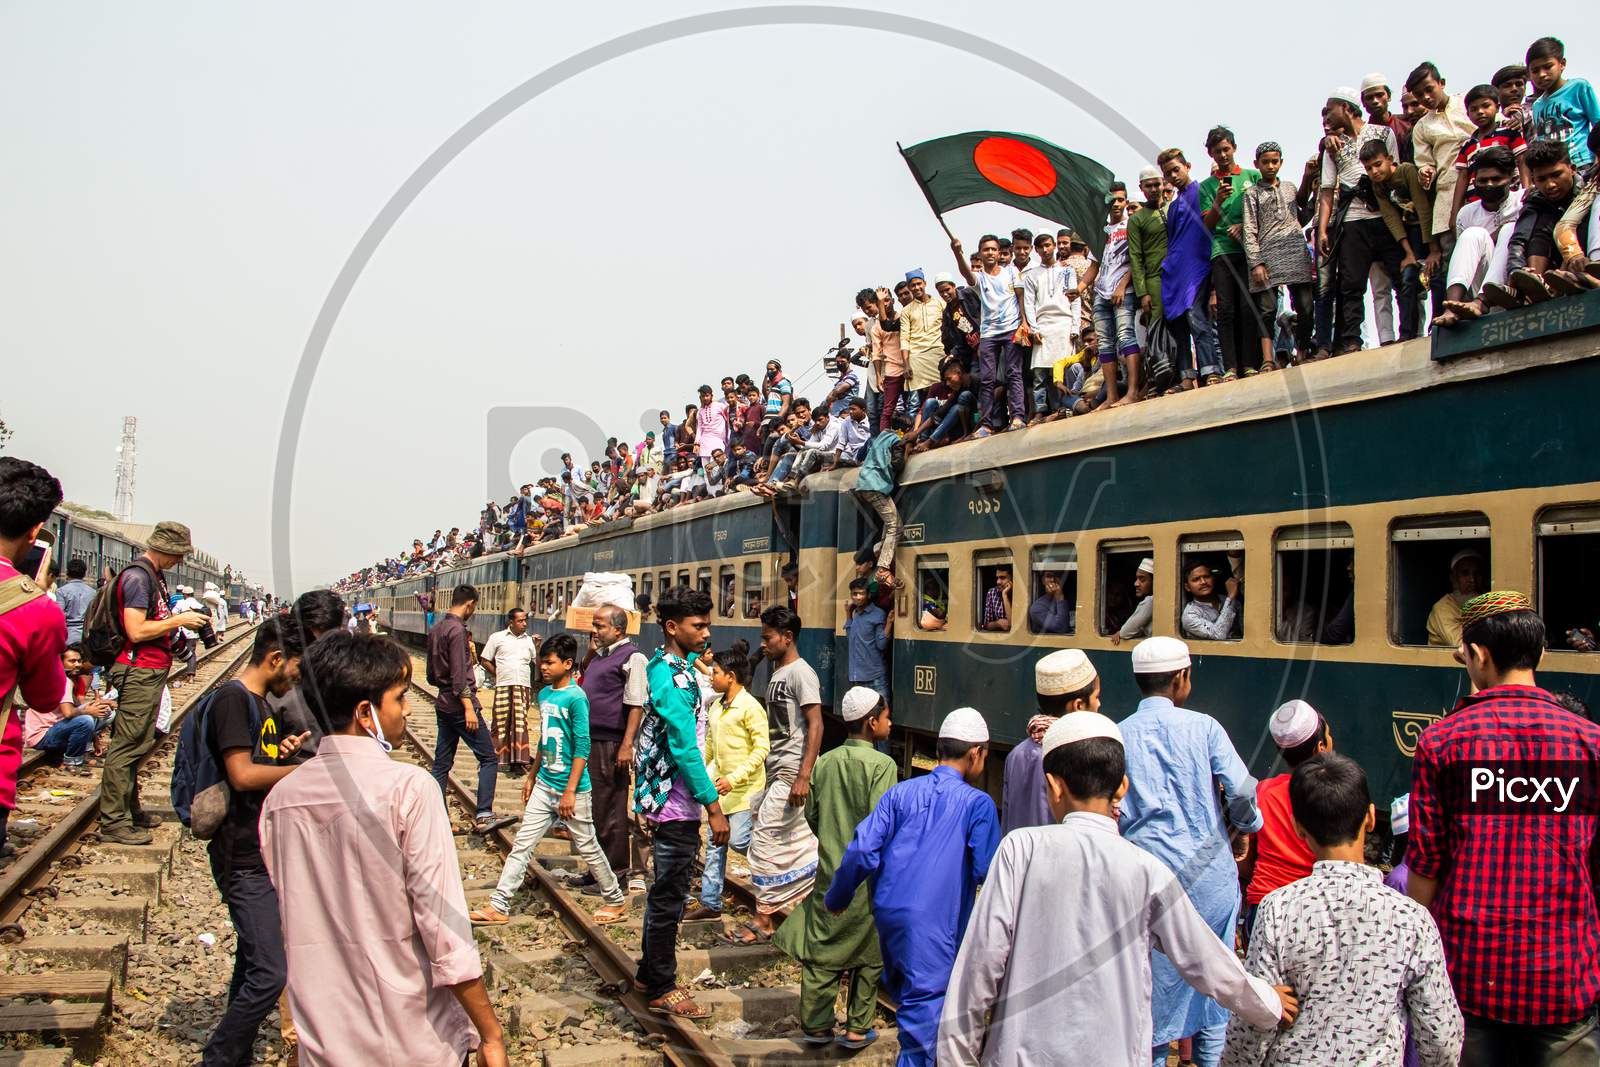 Risky Journey By Train I Captured This Image On 19Th February 2019 From Tonggi Railway Station, Dhaka, Bangladesh, South Asia